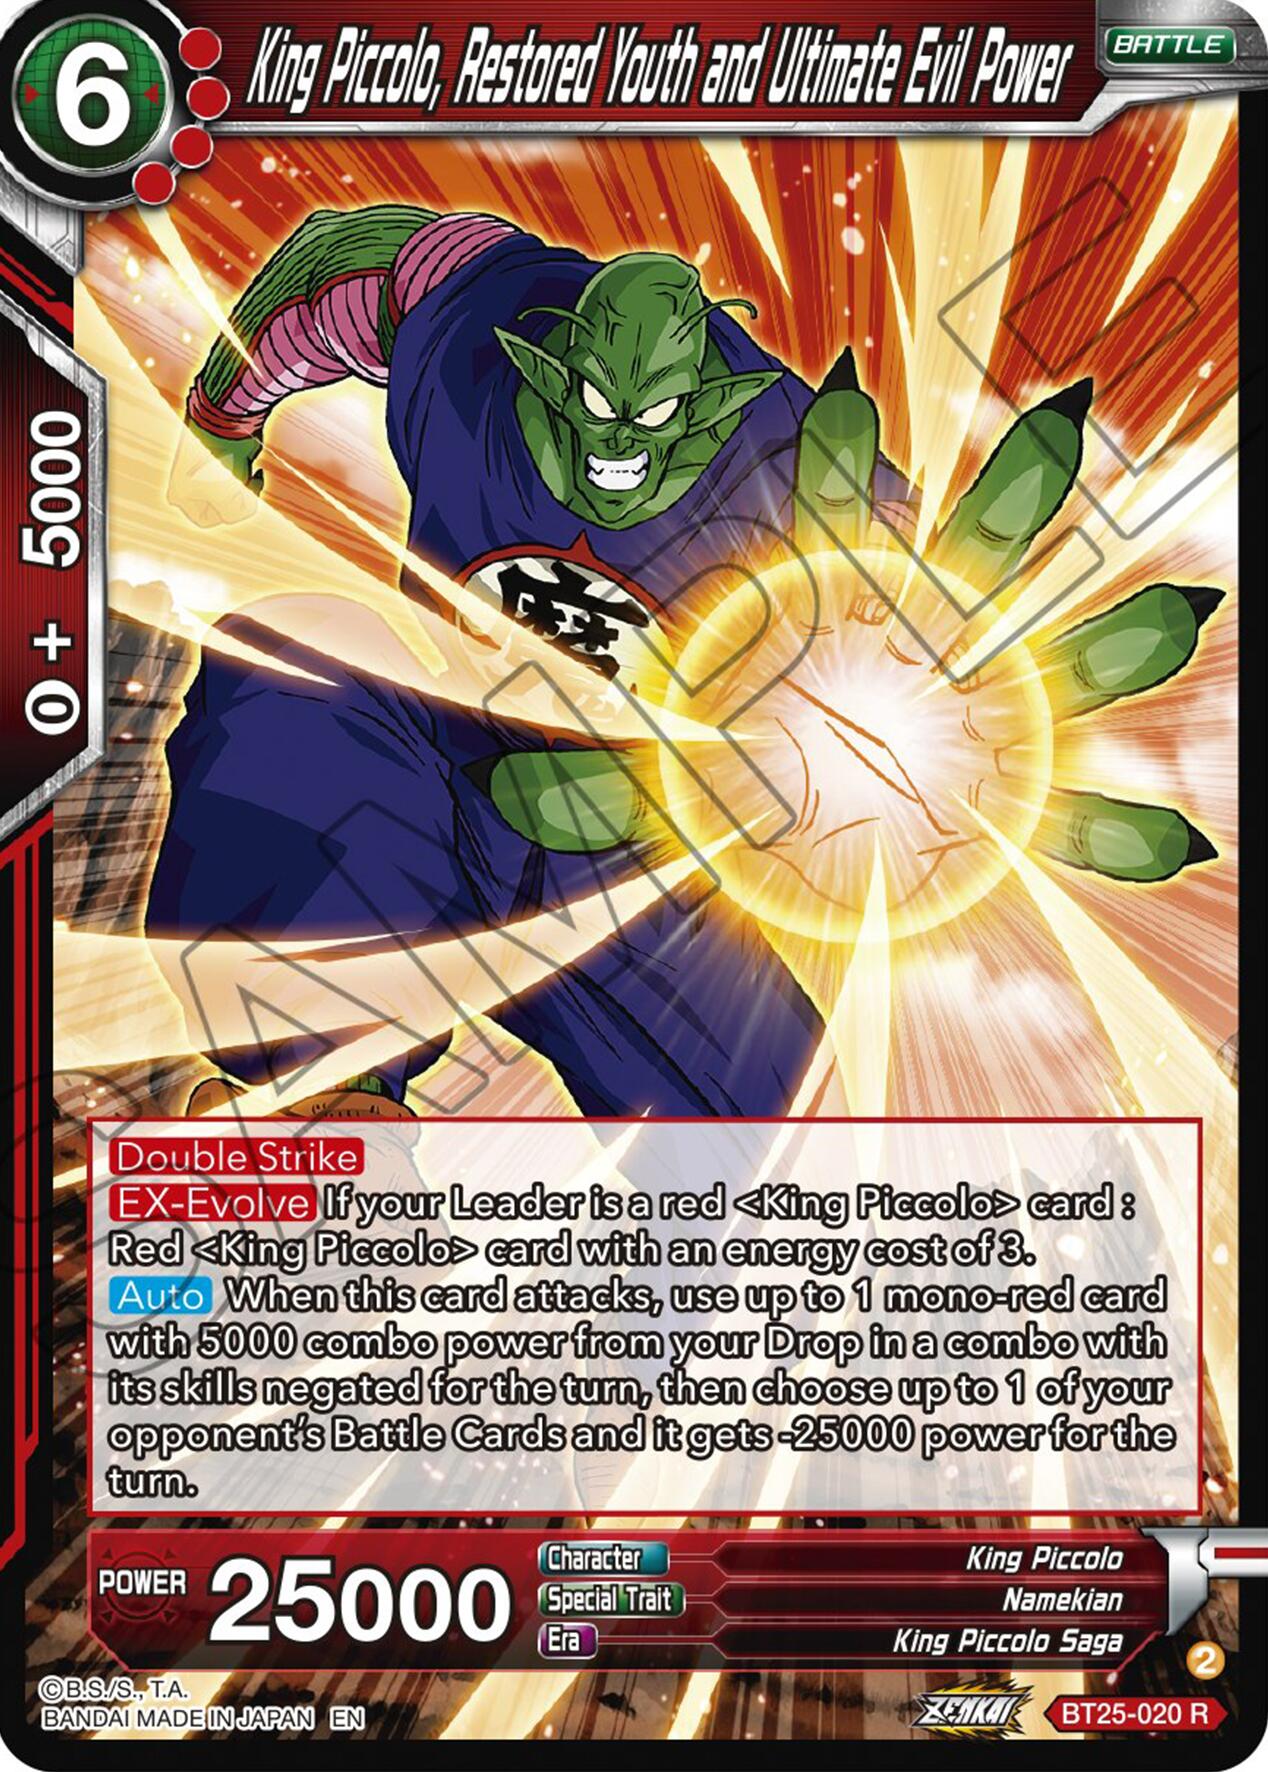 King Piccolo, Restored Youth and Ultimate Evil Power (BT25-020) [Legend of the Dragon Balls] | The Time Vault CA